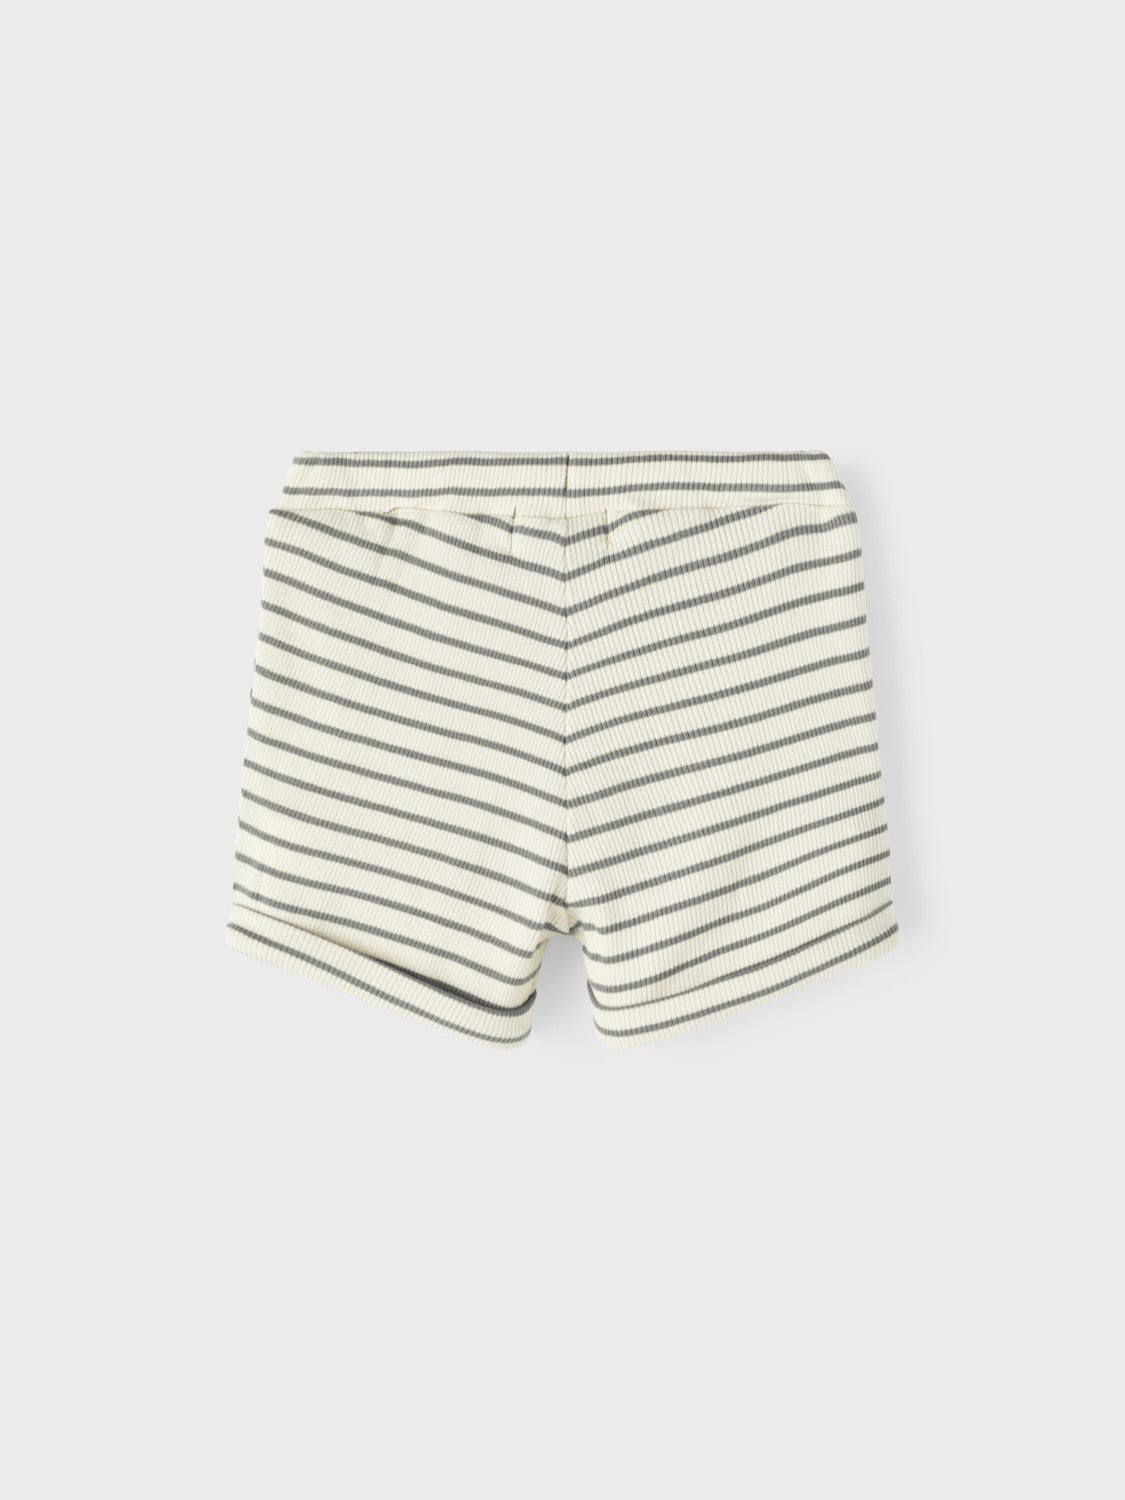 Lil Atelier Gago Shorts - Frost Gray